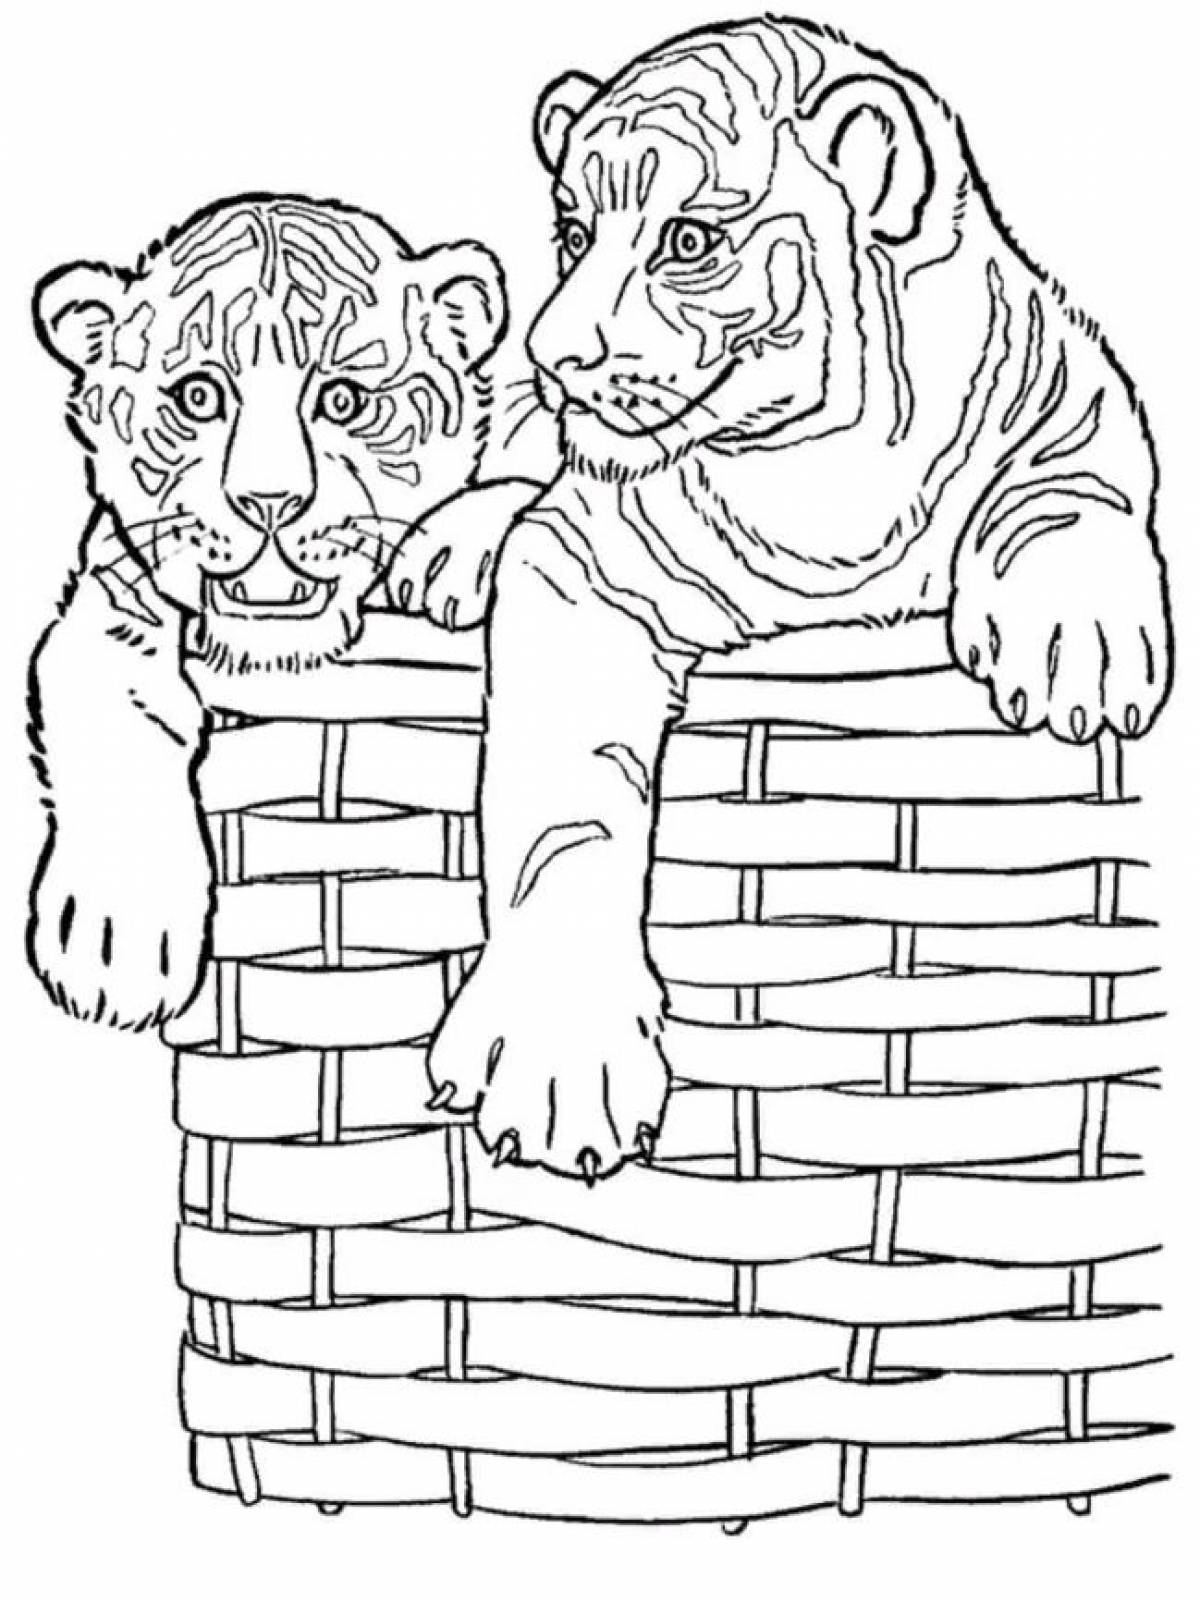 Tigers in a basket